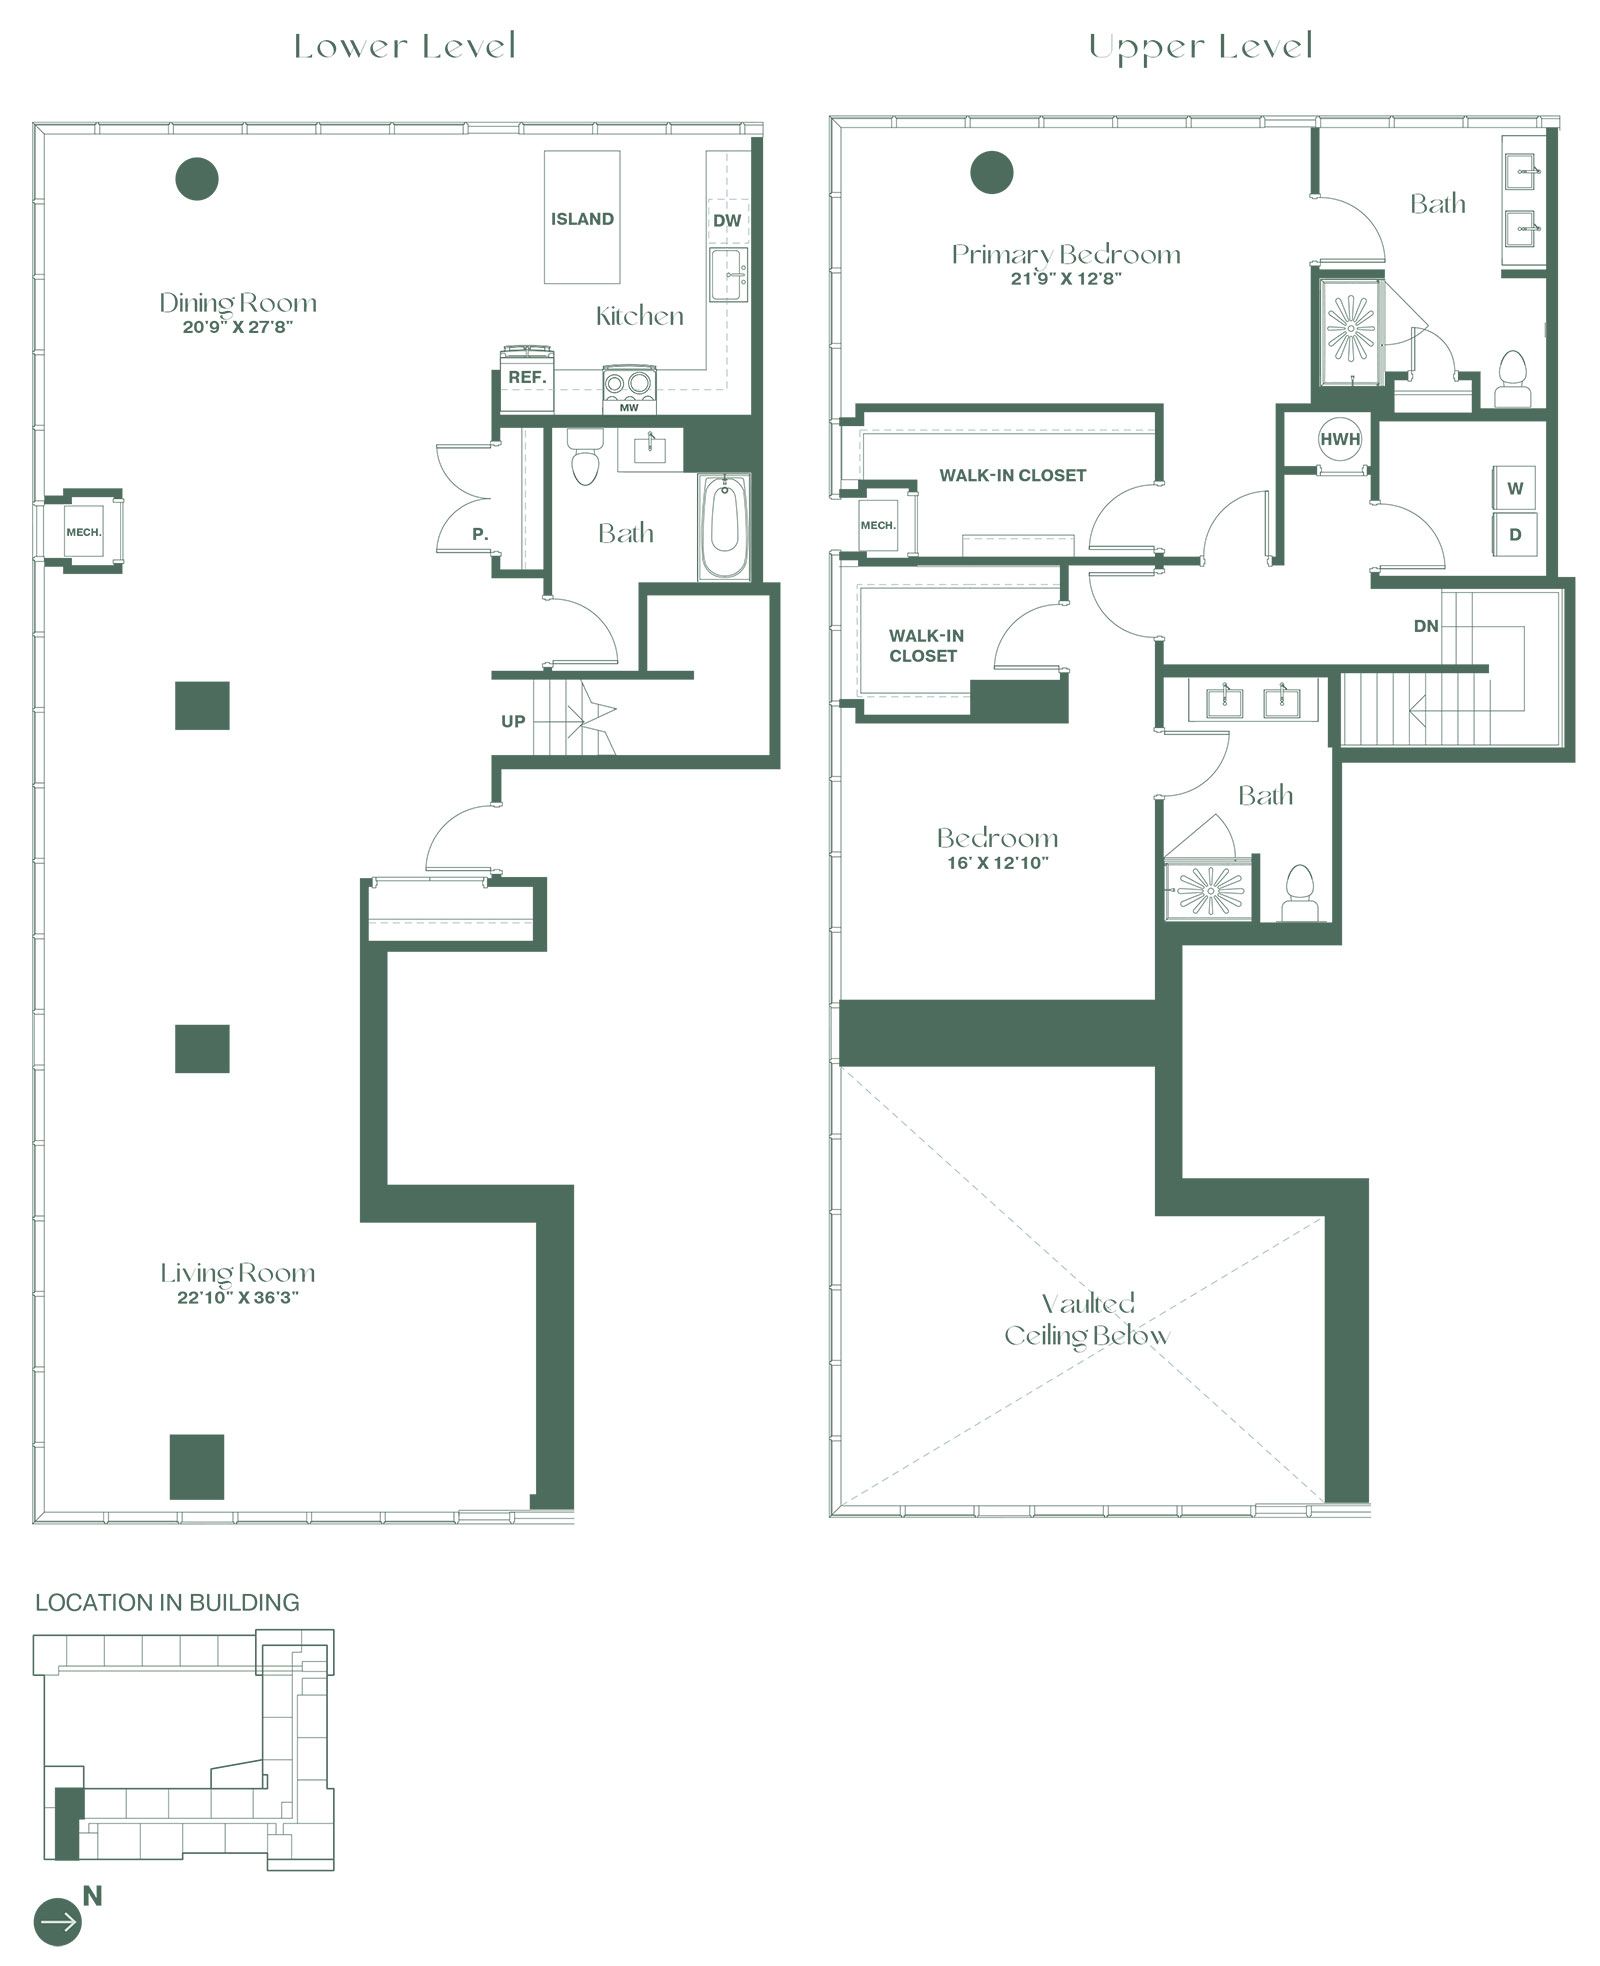 Floorplan for a two bedroom, three bathroom apartment at RVR at Xchange has a spacious first floor with a living, dining room, fully equipped kitchen with pantry. There is a full bathroom next to the steps that lead up to the second floor. On the second floor is a laundry, a bedroom which with a walk-in closet and full bathroom, a primary bedroom with a walk-in closet and a full bathroom.